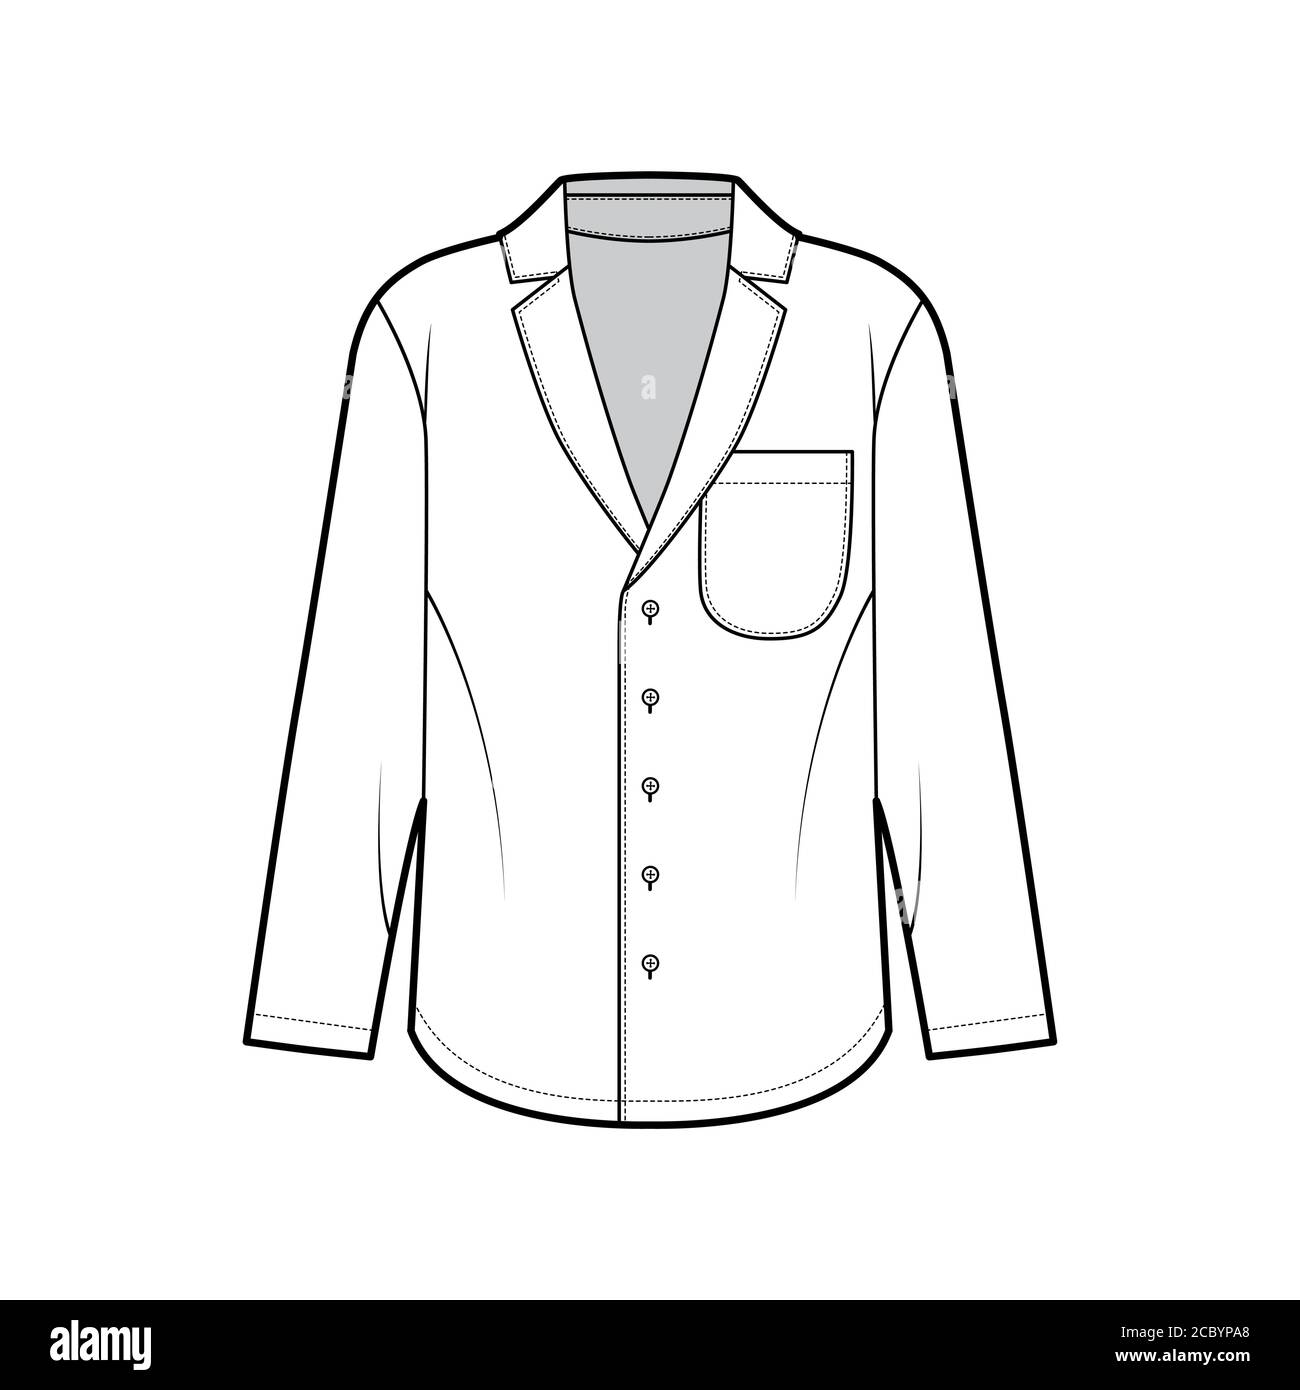 Shirt technical fashion illustration with loose silhouette